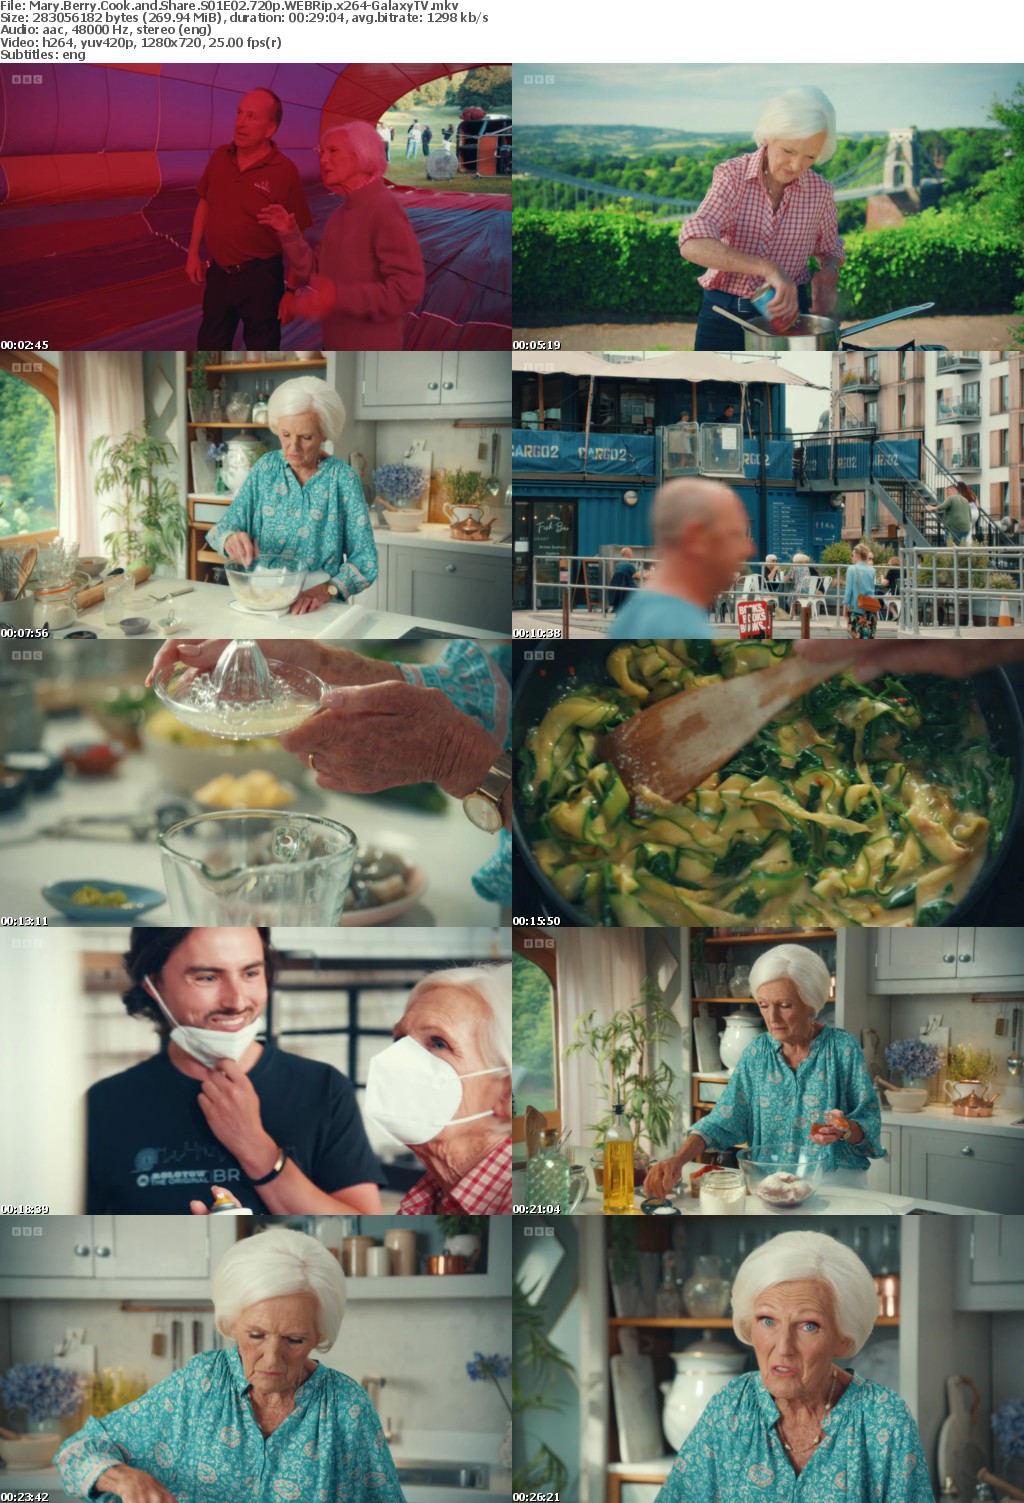 Mary Berry Cook and Share S01 COMPLETE 720p WEBRip x264-GalaxyTV